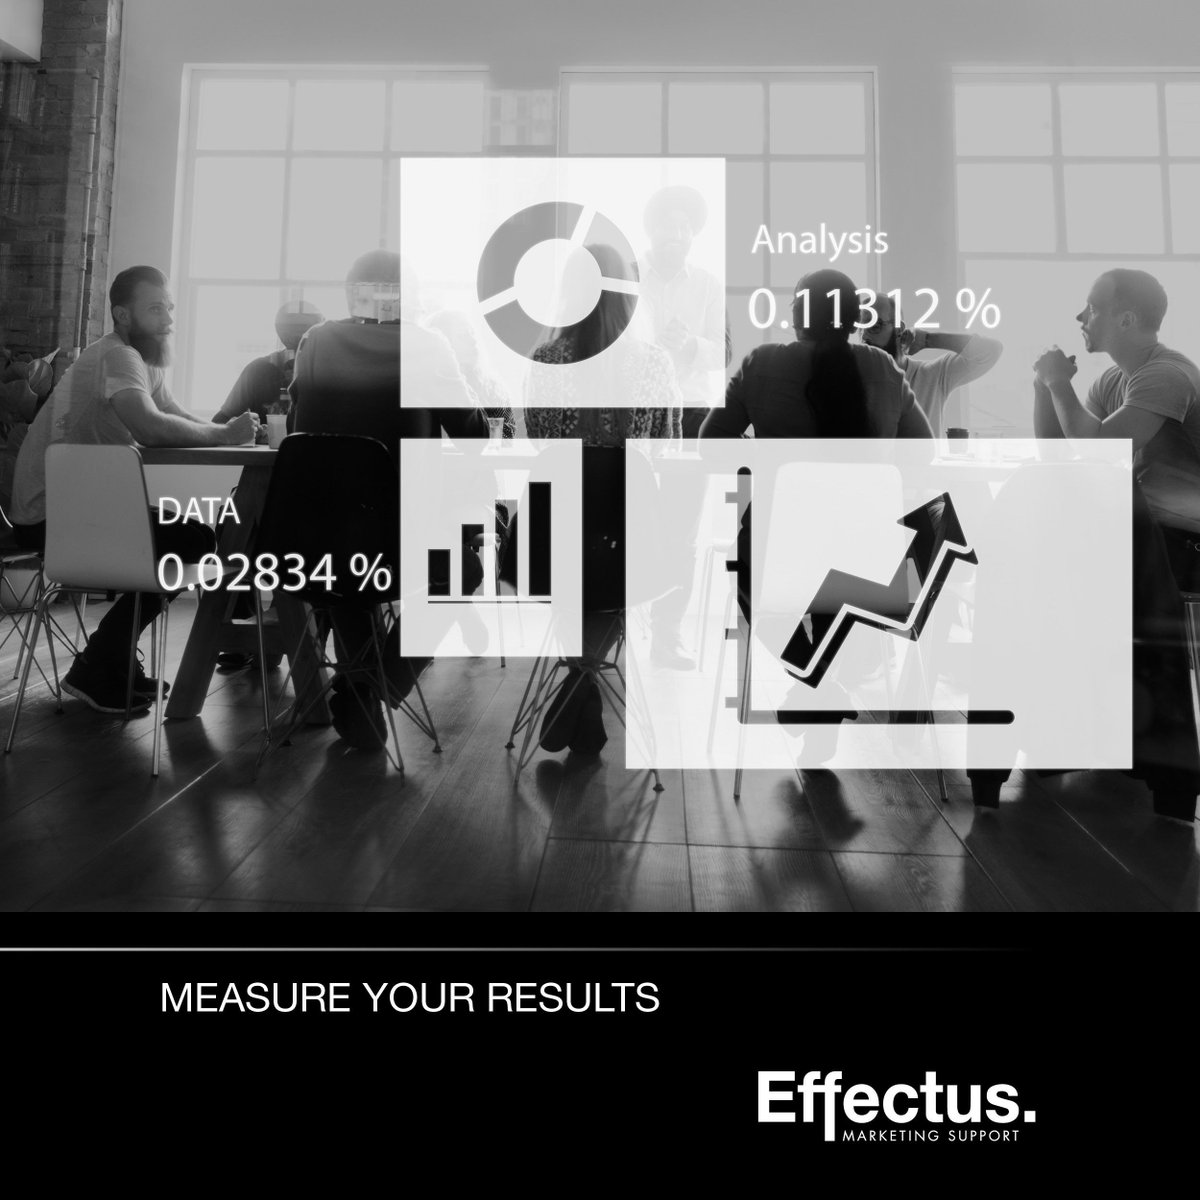 Measure your results

It's important to track the results of your branding and marketing efforts so you can see what's working and what's not. This will help you to refine your strategies over time.

#effectusgroup #branding #marketing #brandingtips #marketingtips